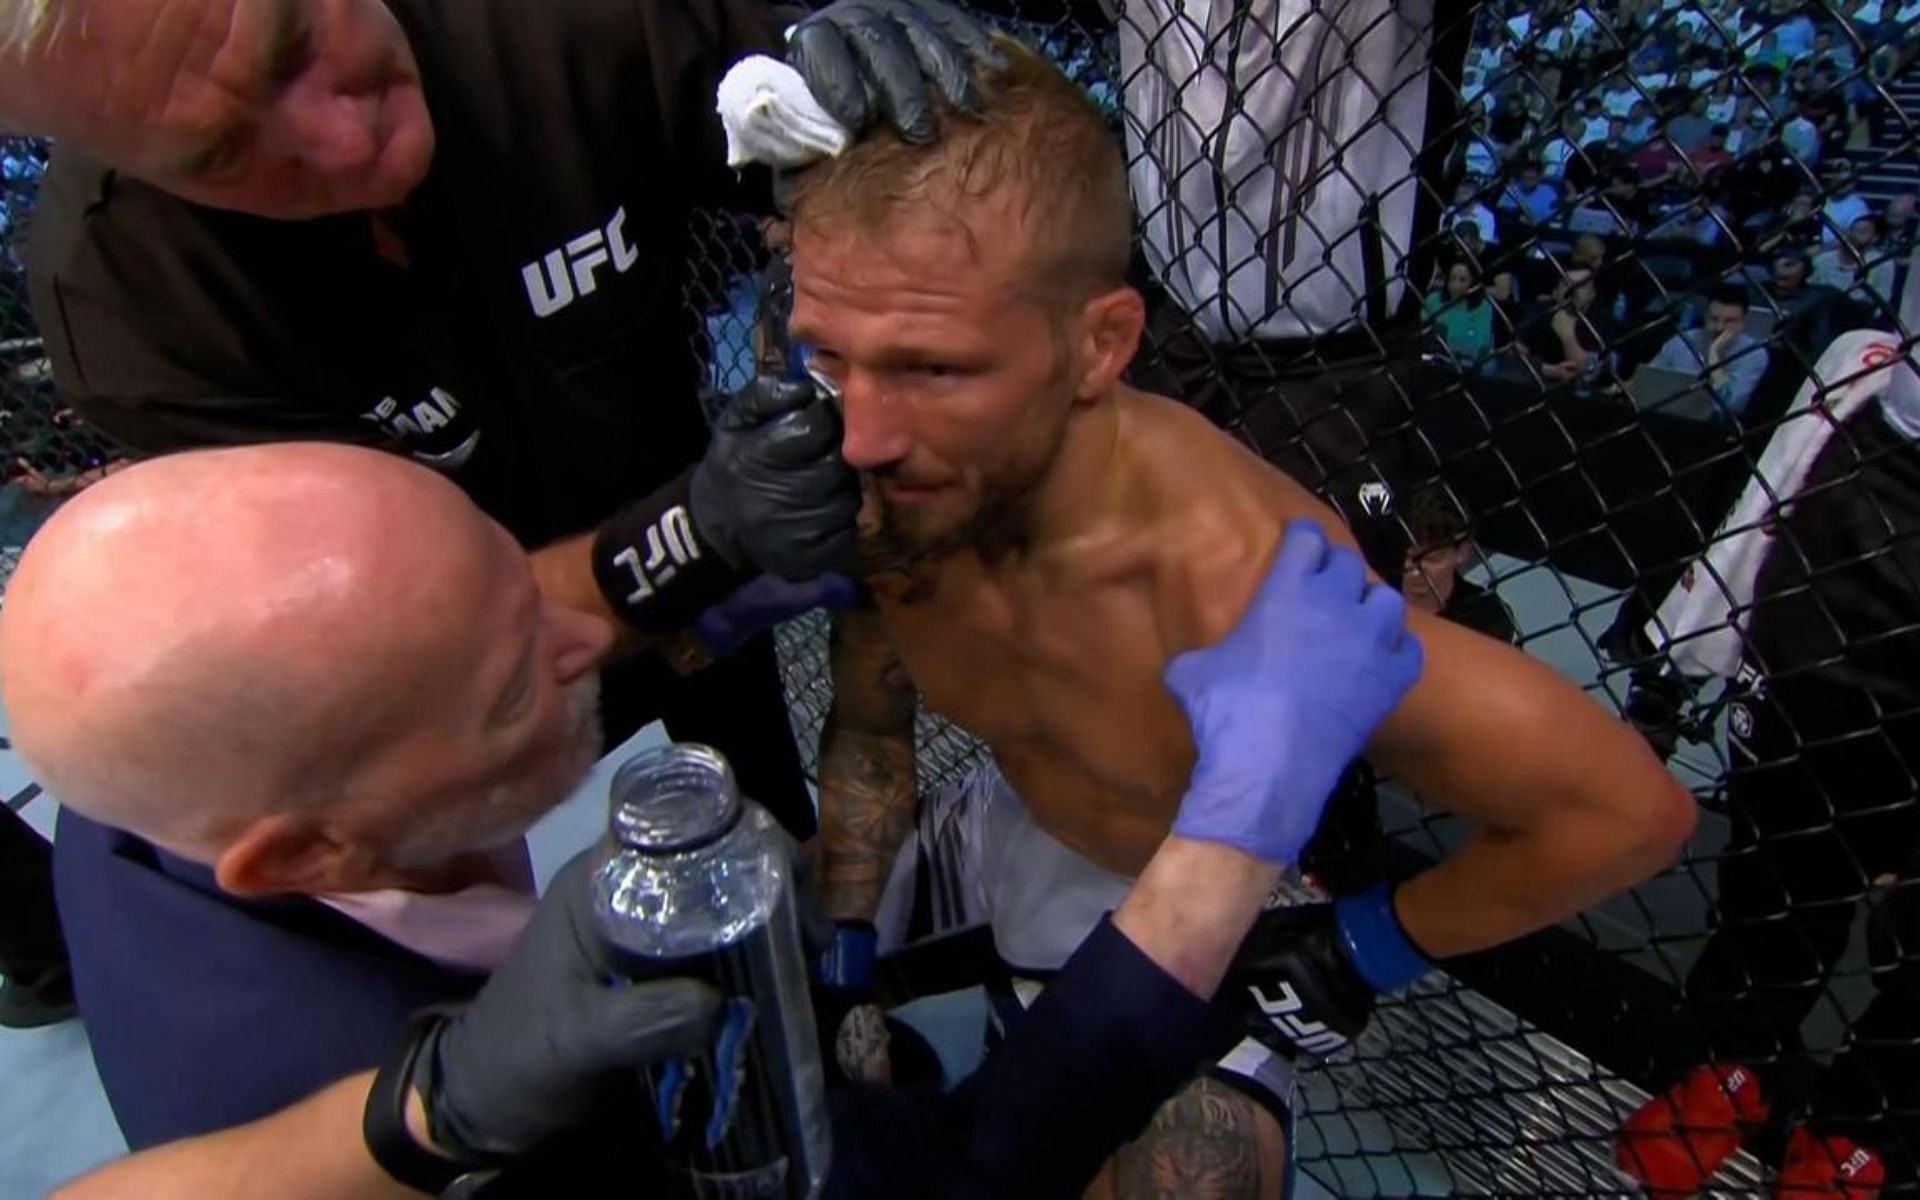 The ringside physician tests the integrity of T.J. Dillashaw's left shoulder after Round 1. /Zuffa